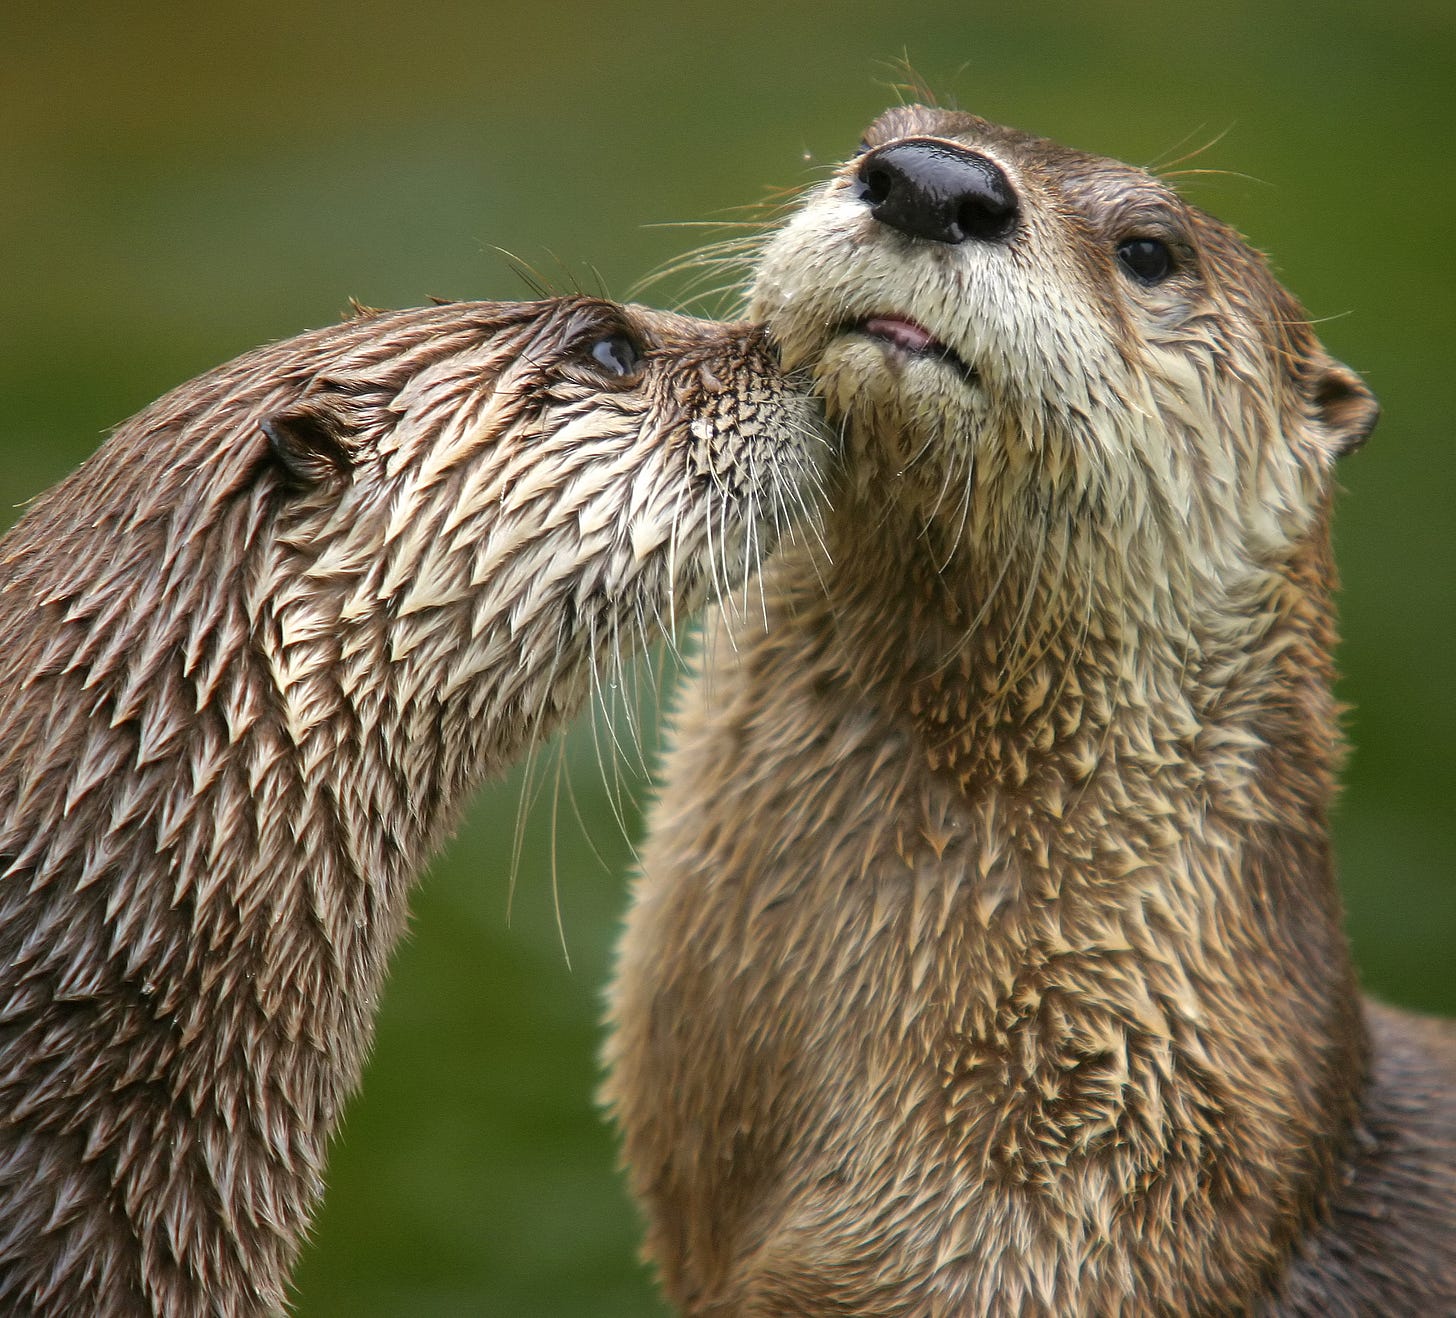 Two North American river otters. The otter on the right hand side of the photo has its head slightly raised, and the otter on the left-hand side seems to be kissing its right cheek.